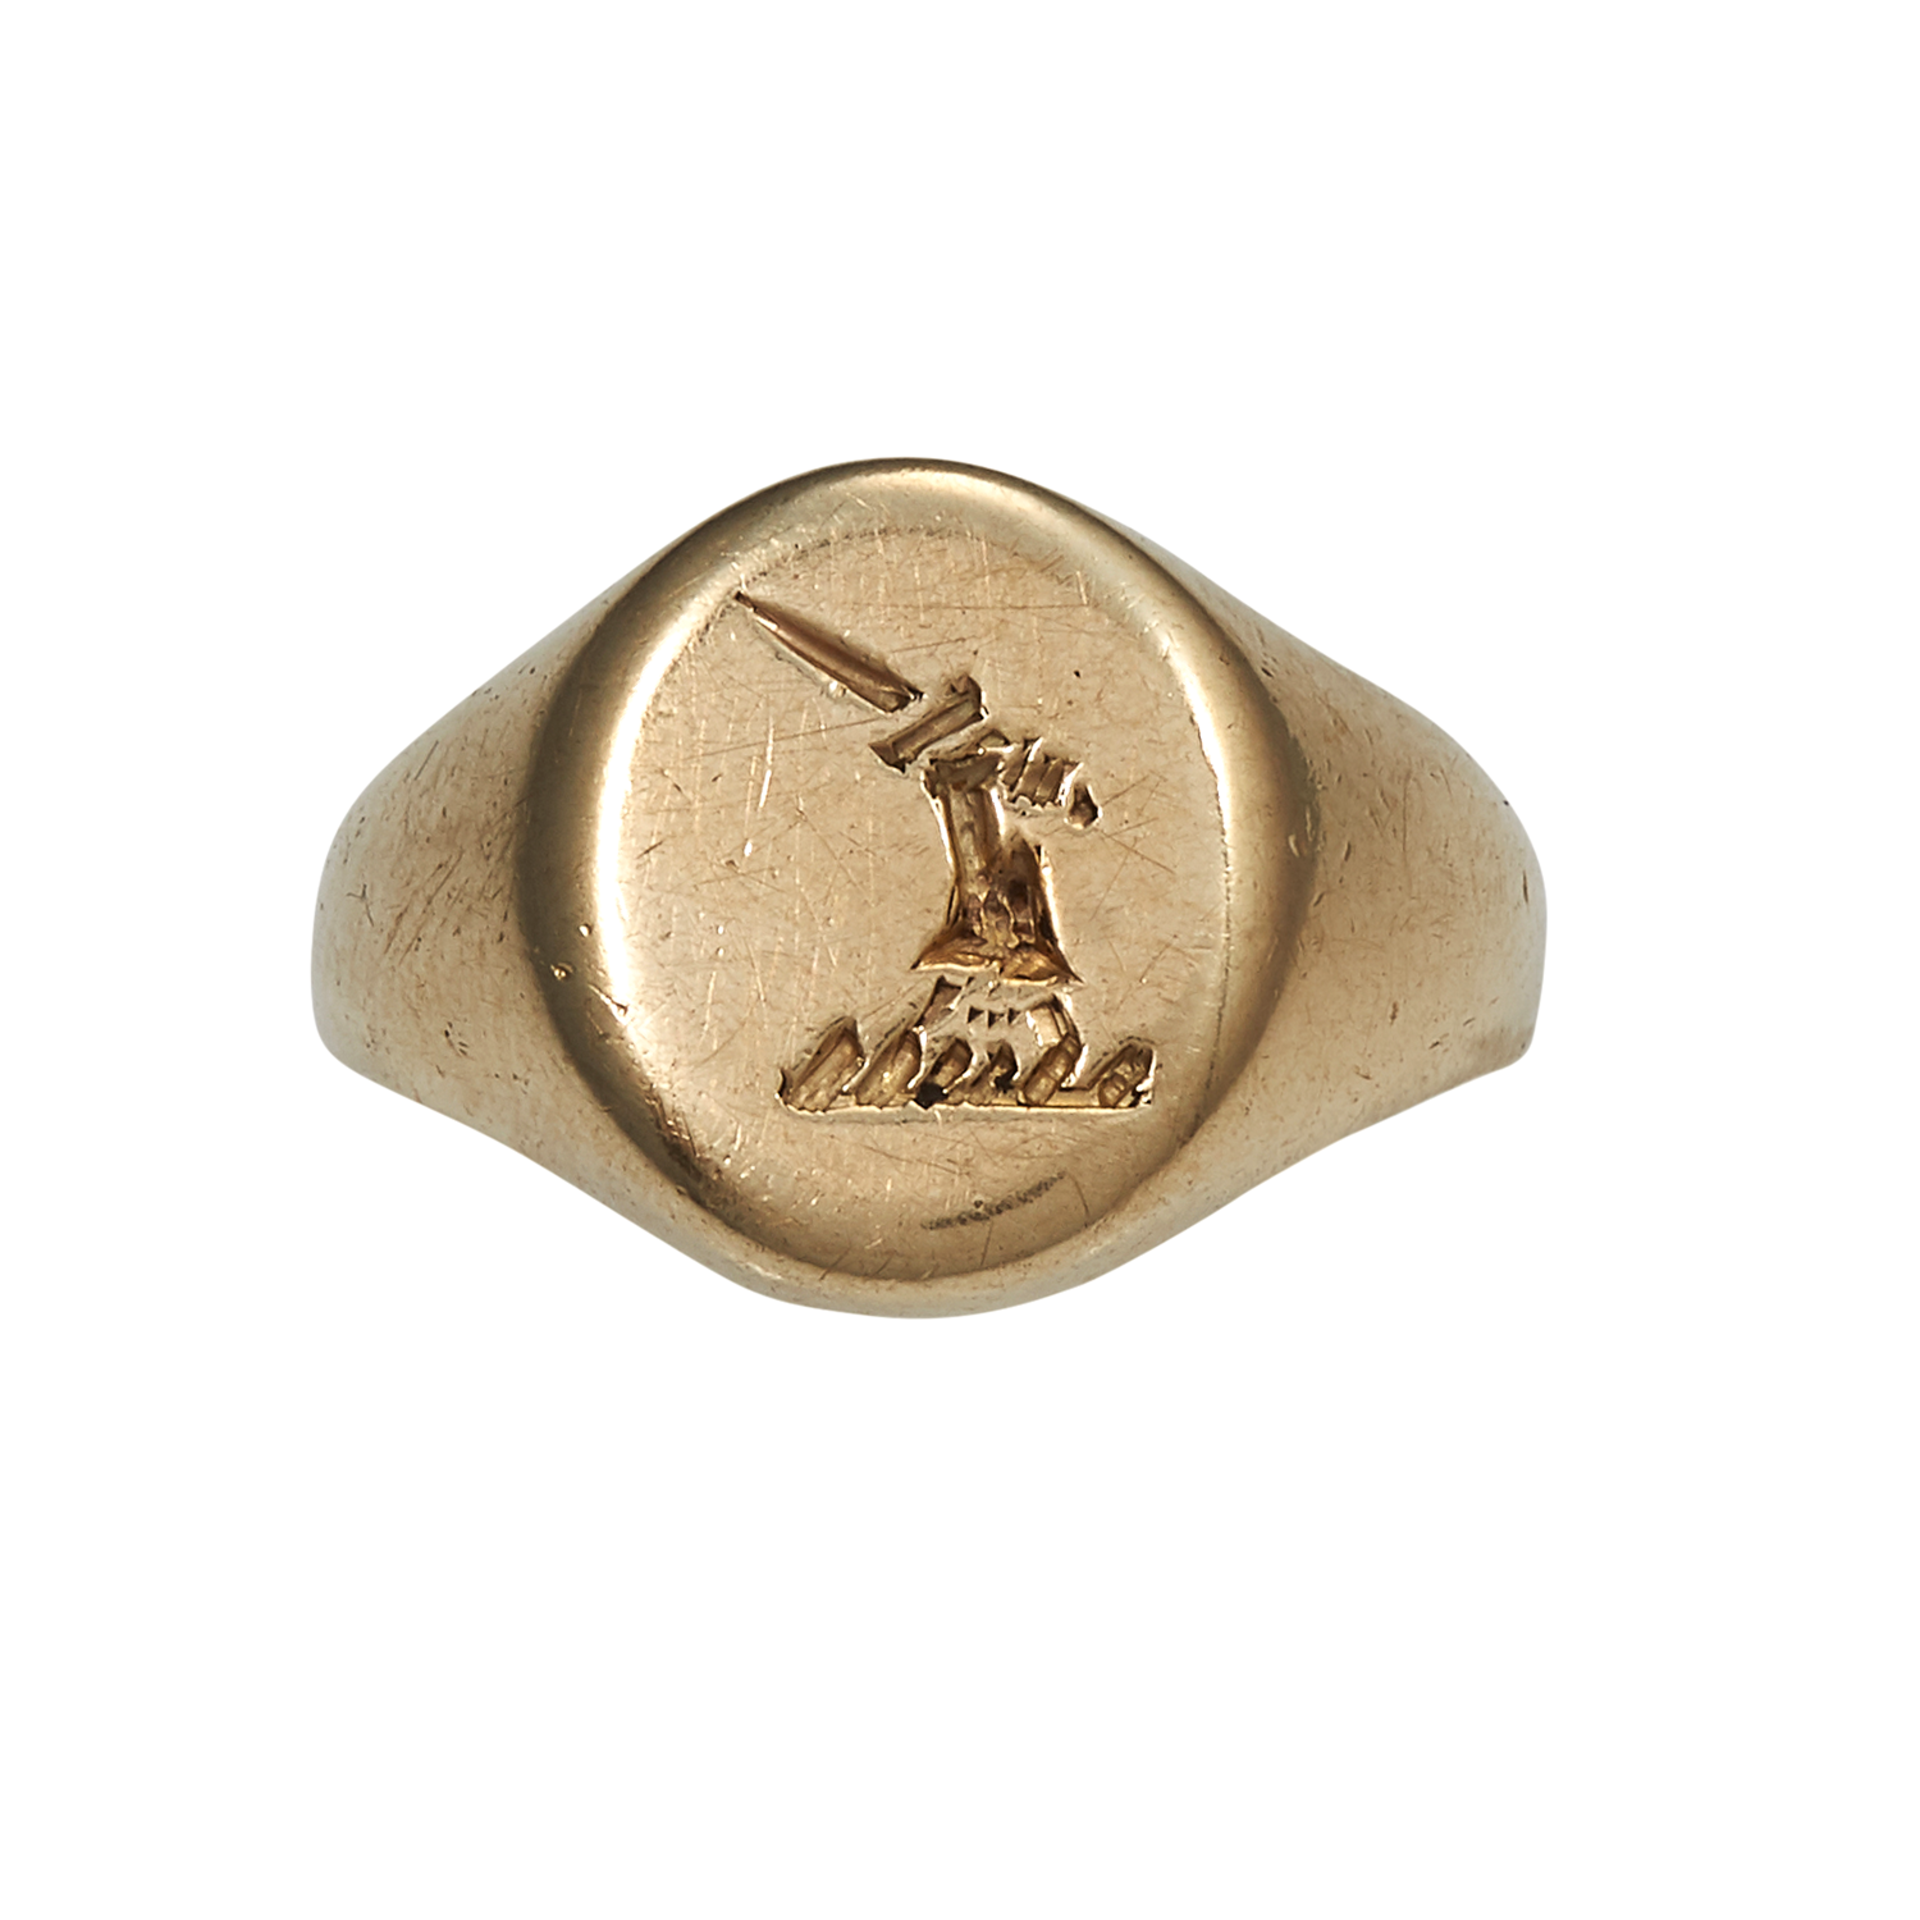 AN ANTIQUE INTAGLIO SIGNET RING in yellow gold, the oval face with engraved heraldic crest, size L /